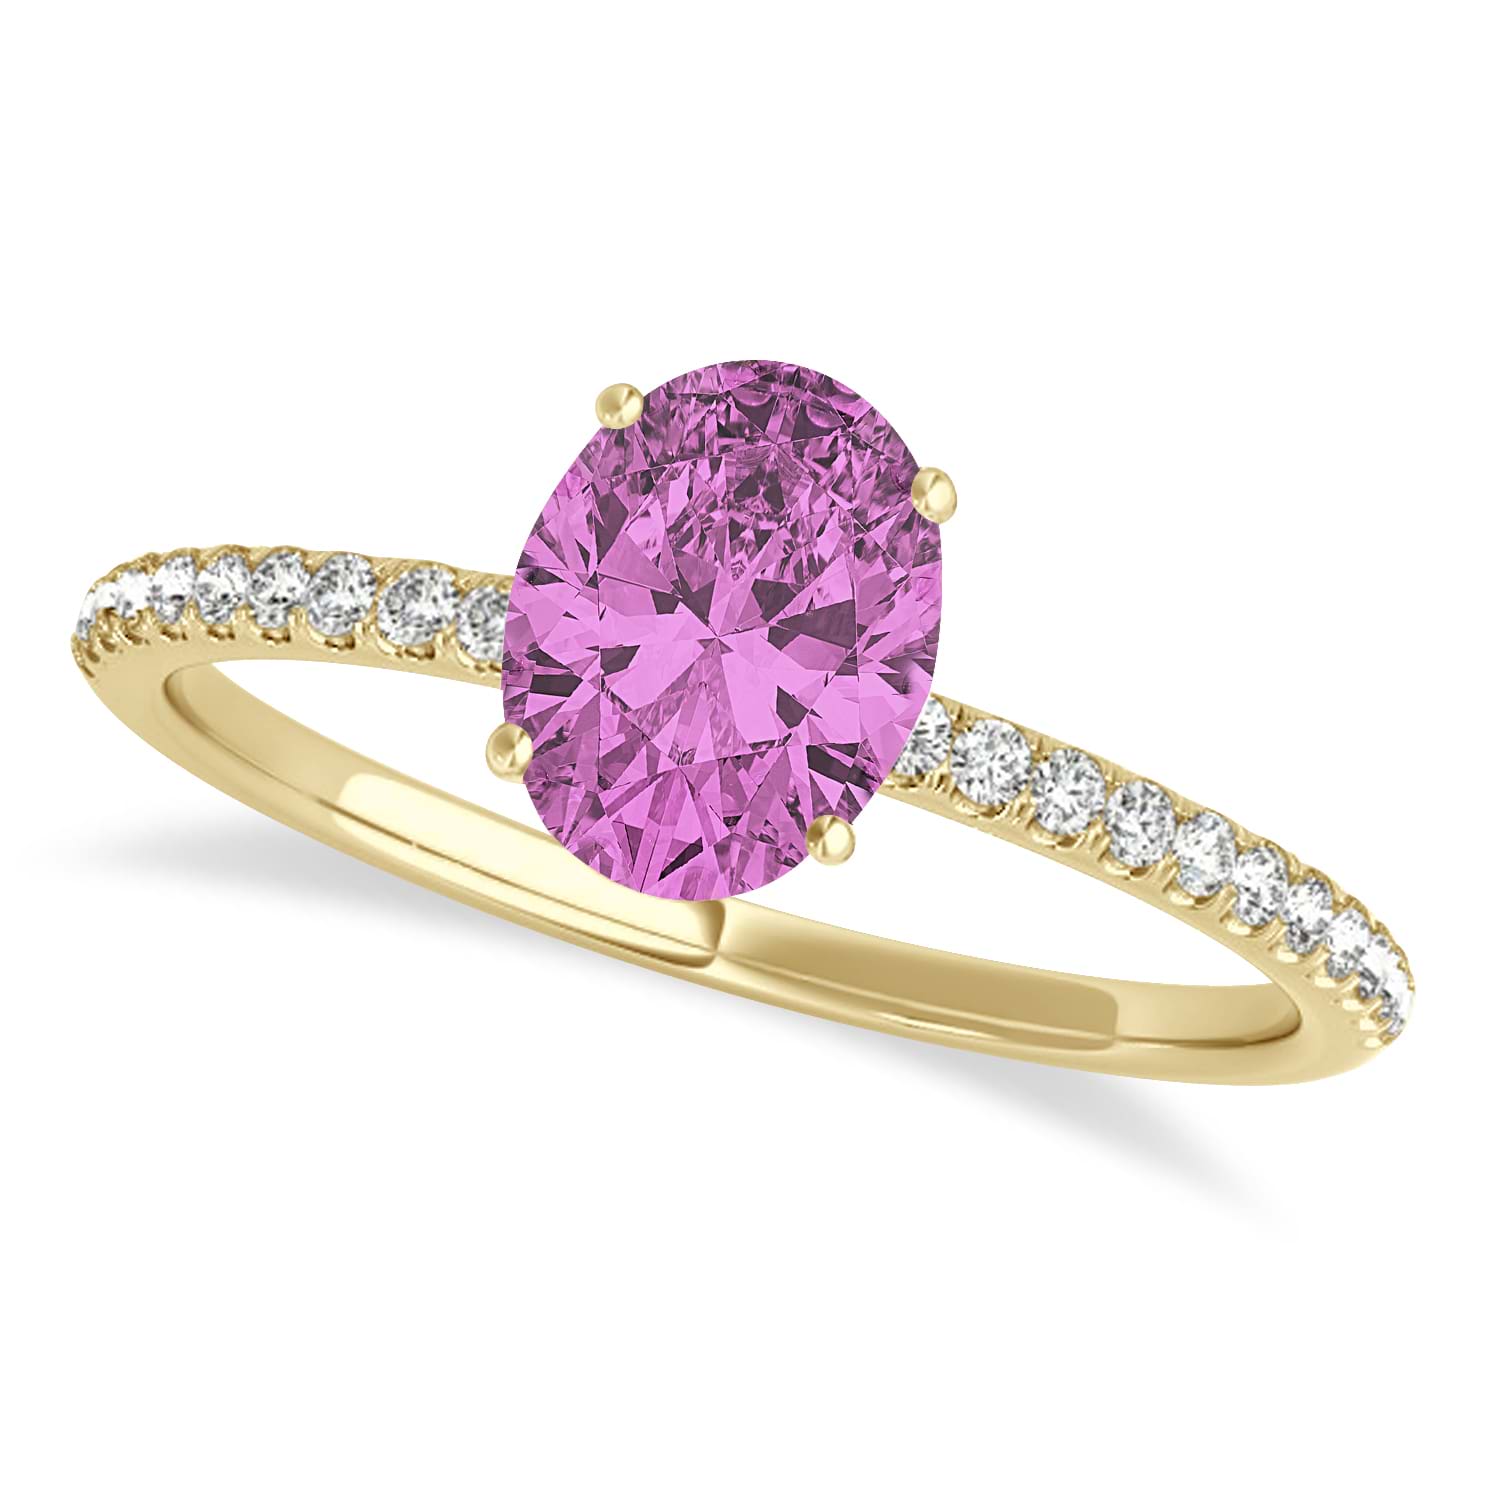 Pink Sapphire & Diamond Accented Oval Shape Engagement Ring 14k Yellow Gold (3.00ct)